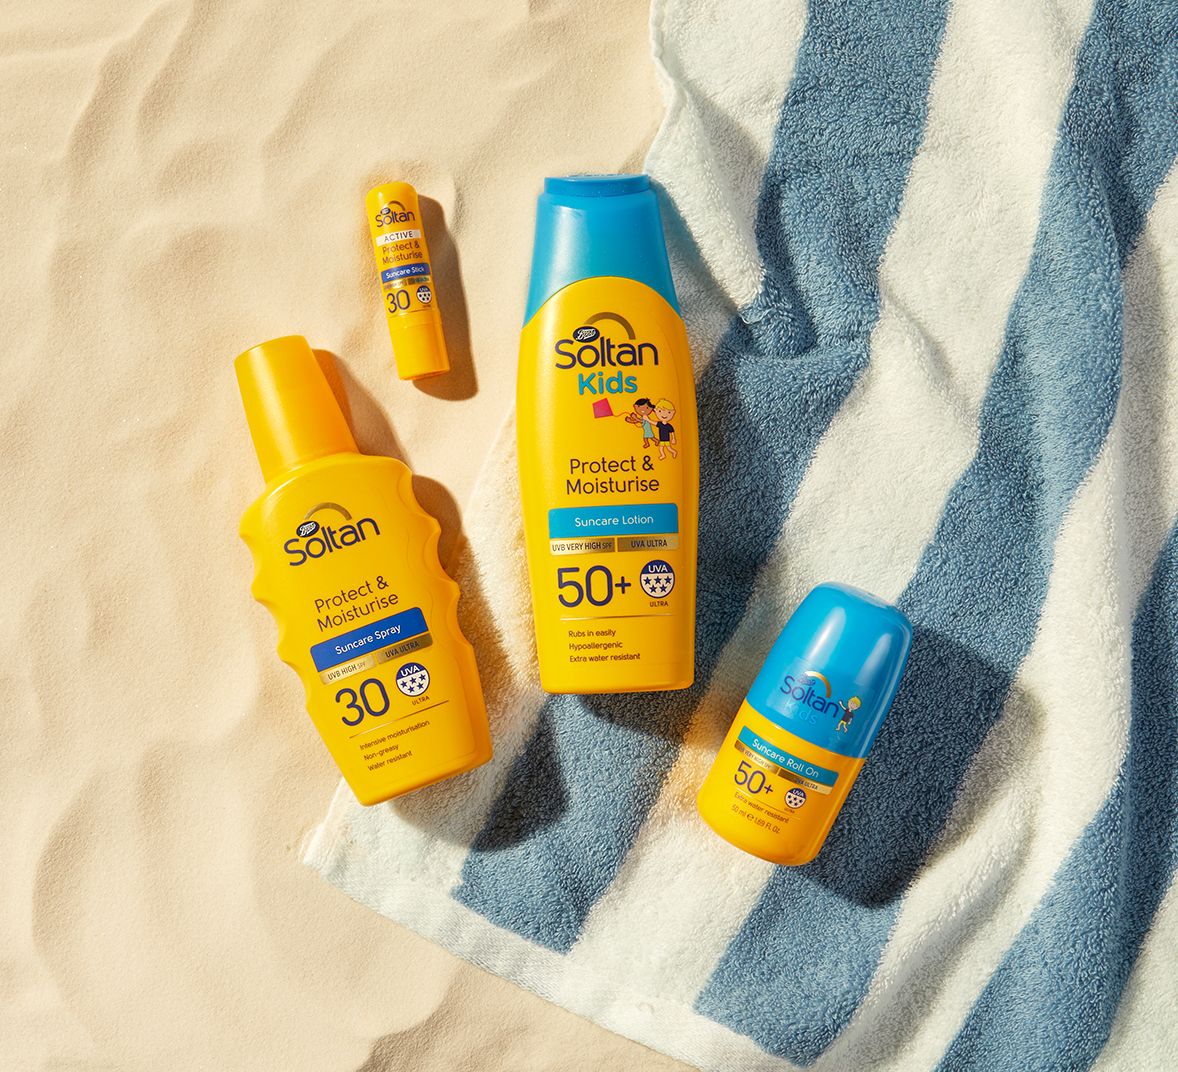 The Soltan range from Boots